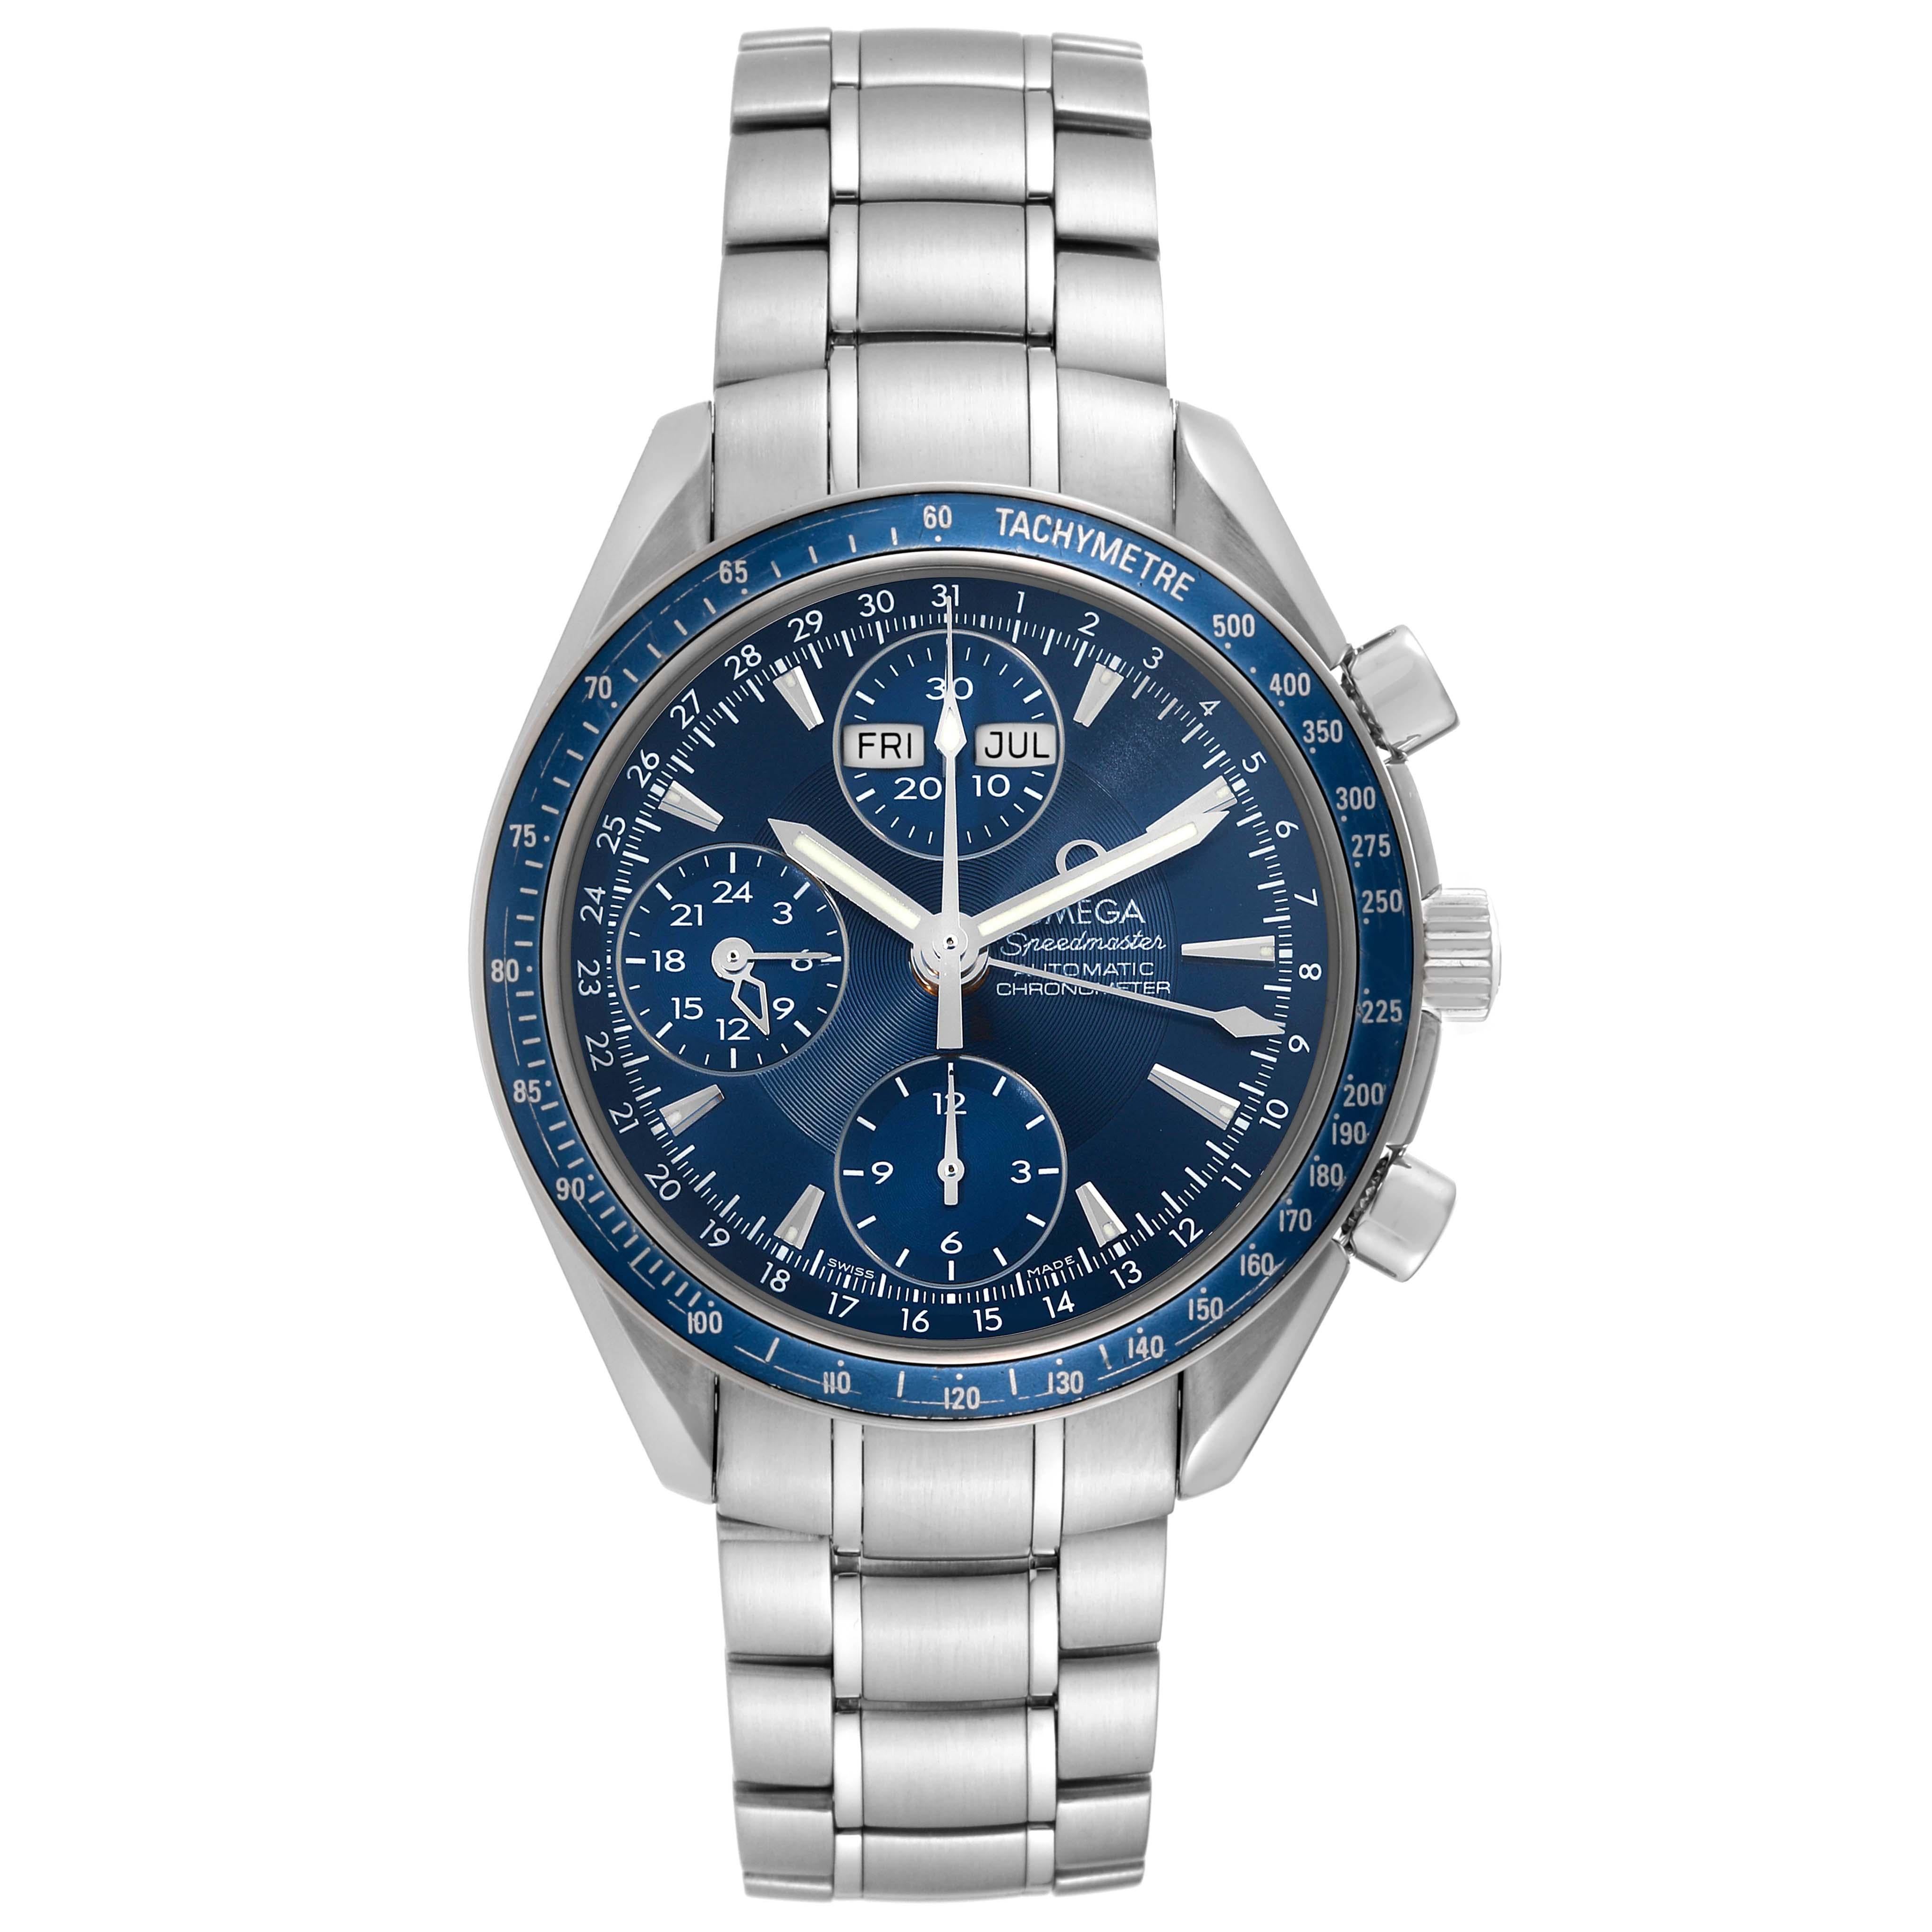 Omega Speedmaster Day Date Blue Dial Chronograph Steel Mens Watch 3222.80.00. Automatic self-winding chronograph movement. Stainless steel round case 39.0 mm in diameter. Blue bezel with tachymeter scale. Scratch-resistant sapphire crystal with